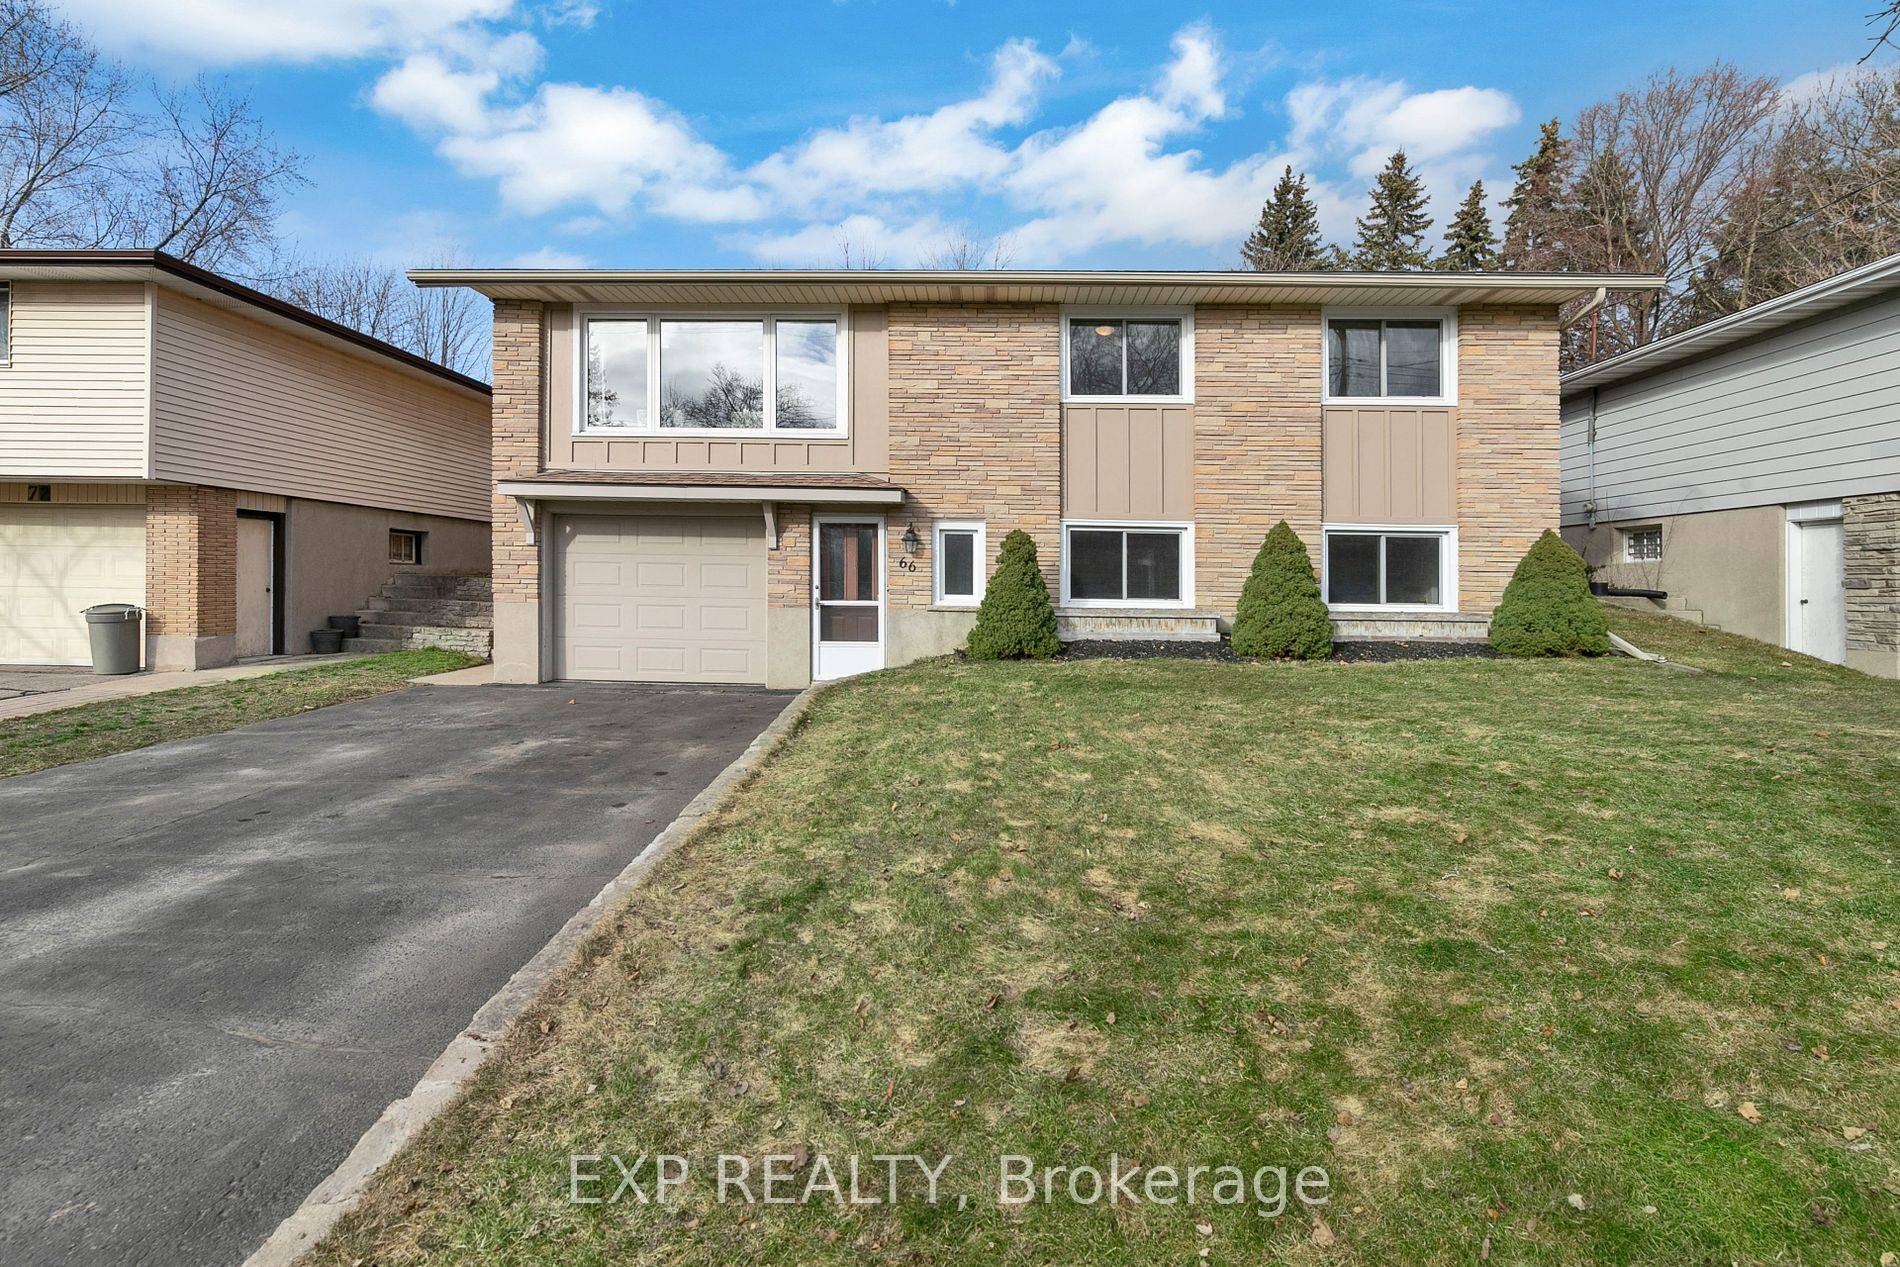 Welcome to 66 Carwood Crescent in the sought after Rockway in Kitchener !